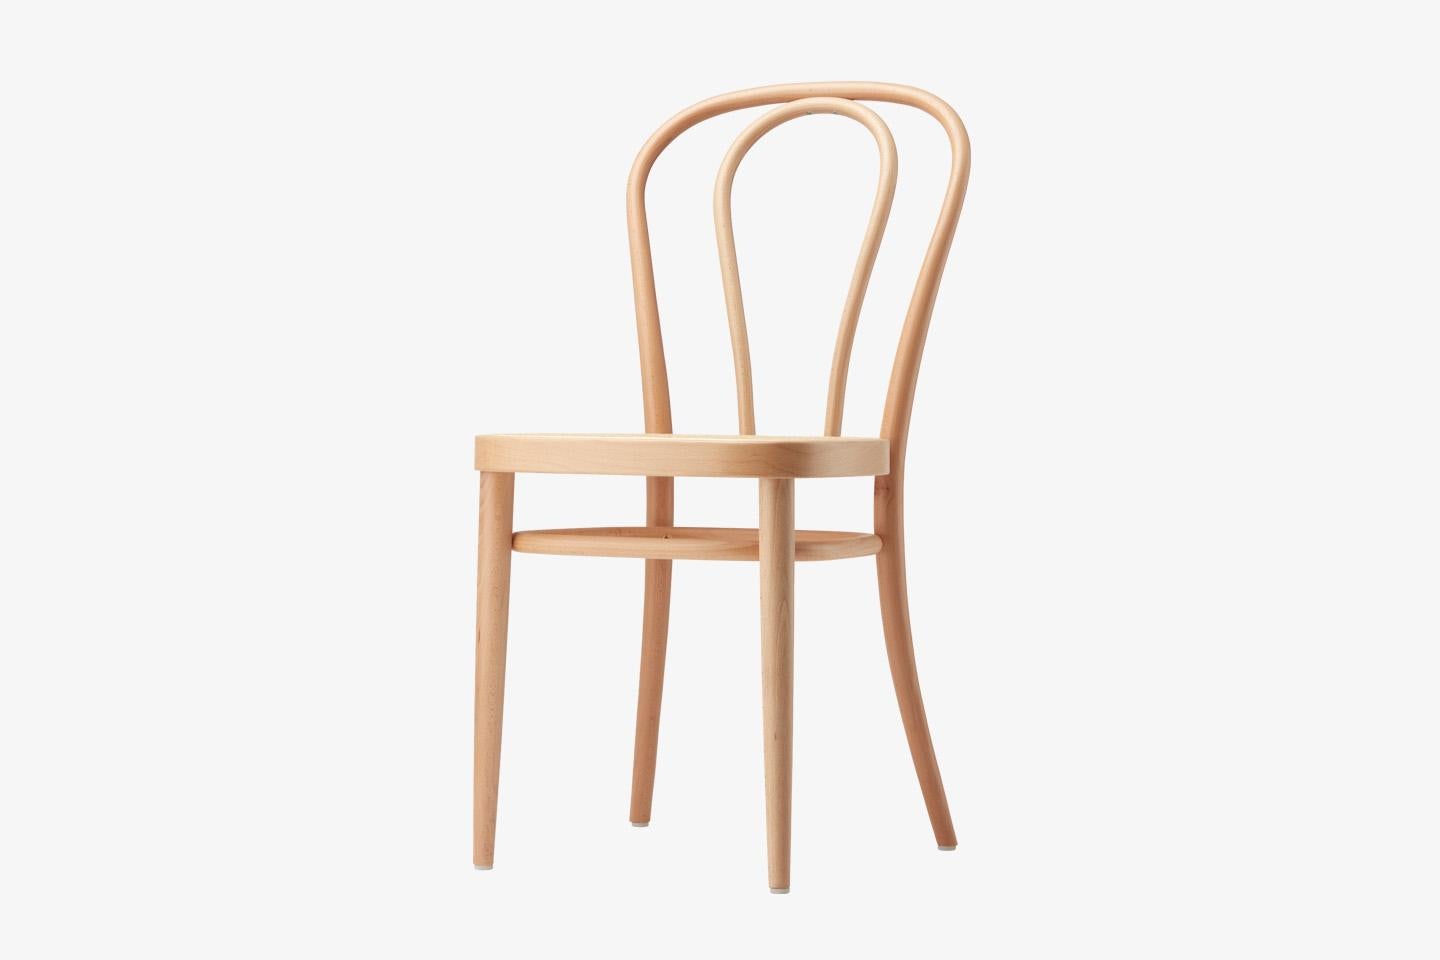 Range 218
First manufactured in 1876, model no. 18 with the striking “hairpin” in its backrest returns to the Gebrüder T 1819 portfolio with clear and reduced aesthetics as 218. Along with the chairs no. 14 and no. 56, chair no. 18 was one of the